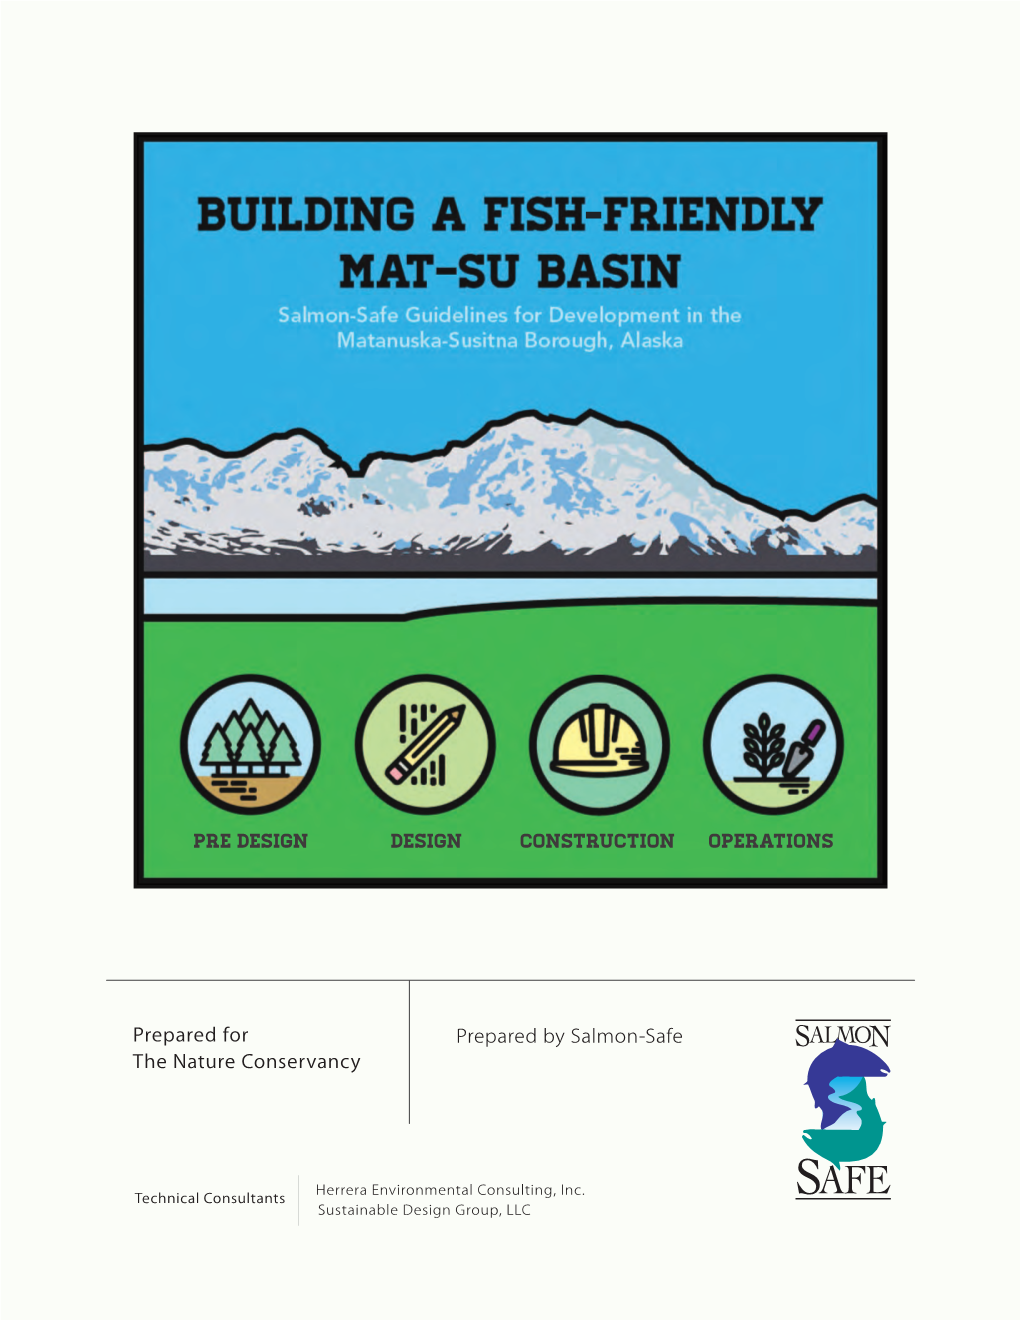 Building a Fish-Friendly Mat-Su Basin: Salmon-Safe Guidelines For